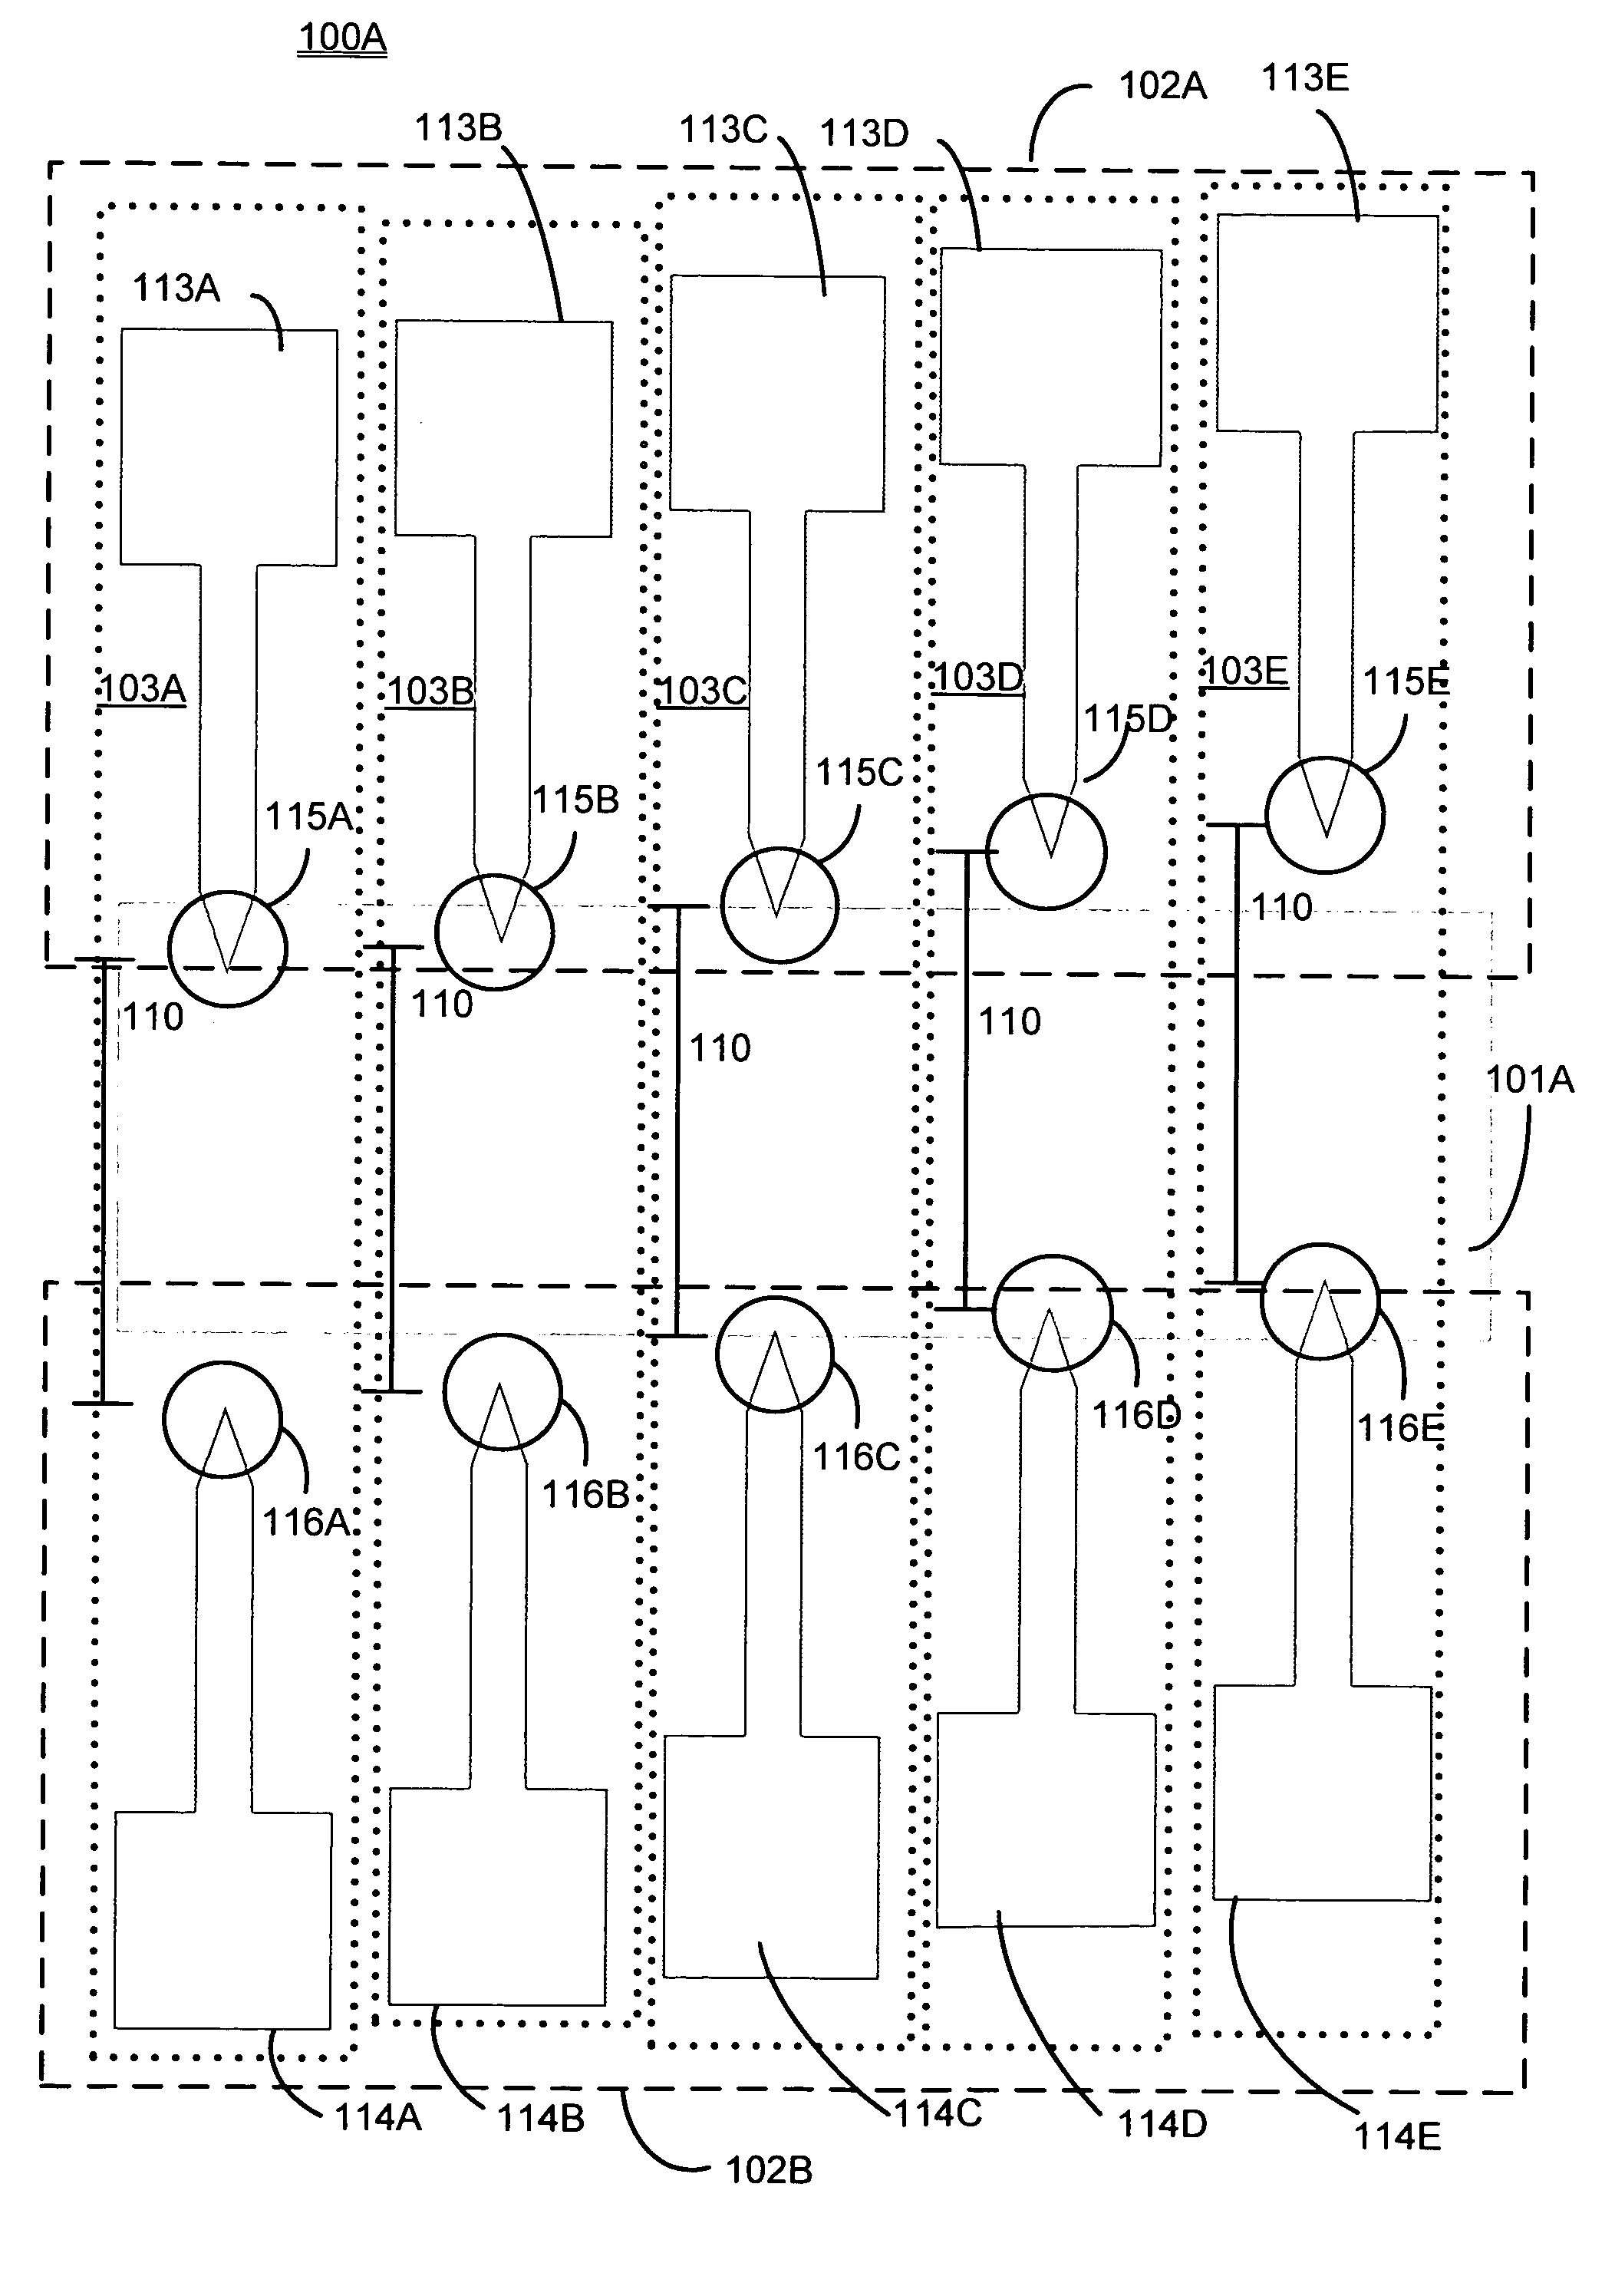 Electrical open/short contact alignment structure for active region vs. gate region